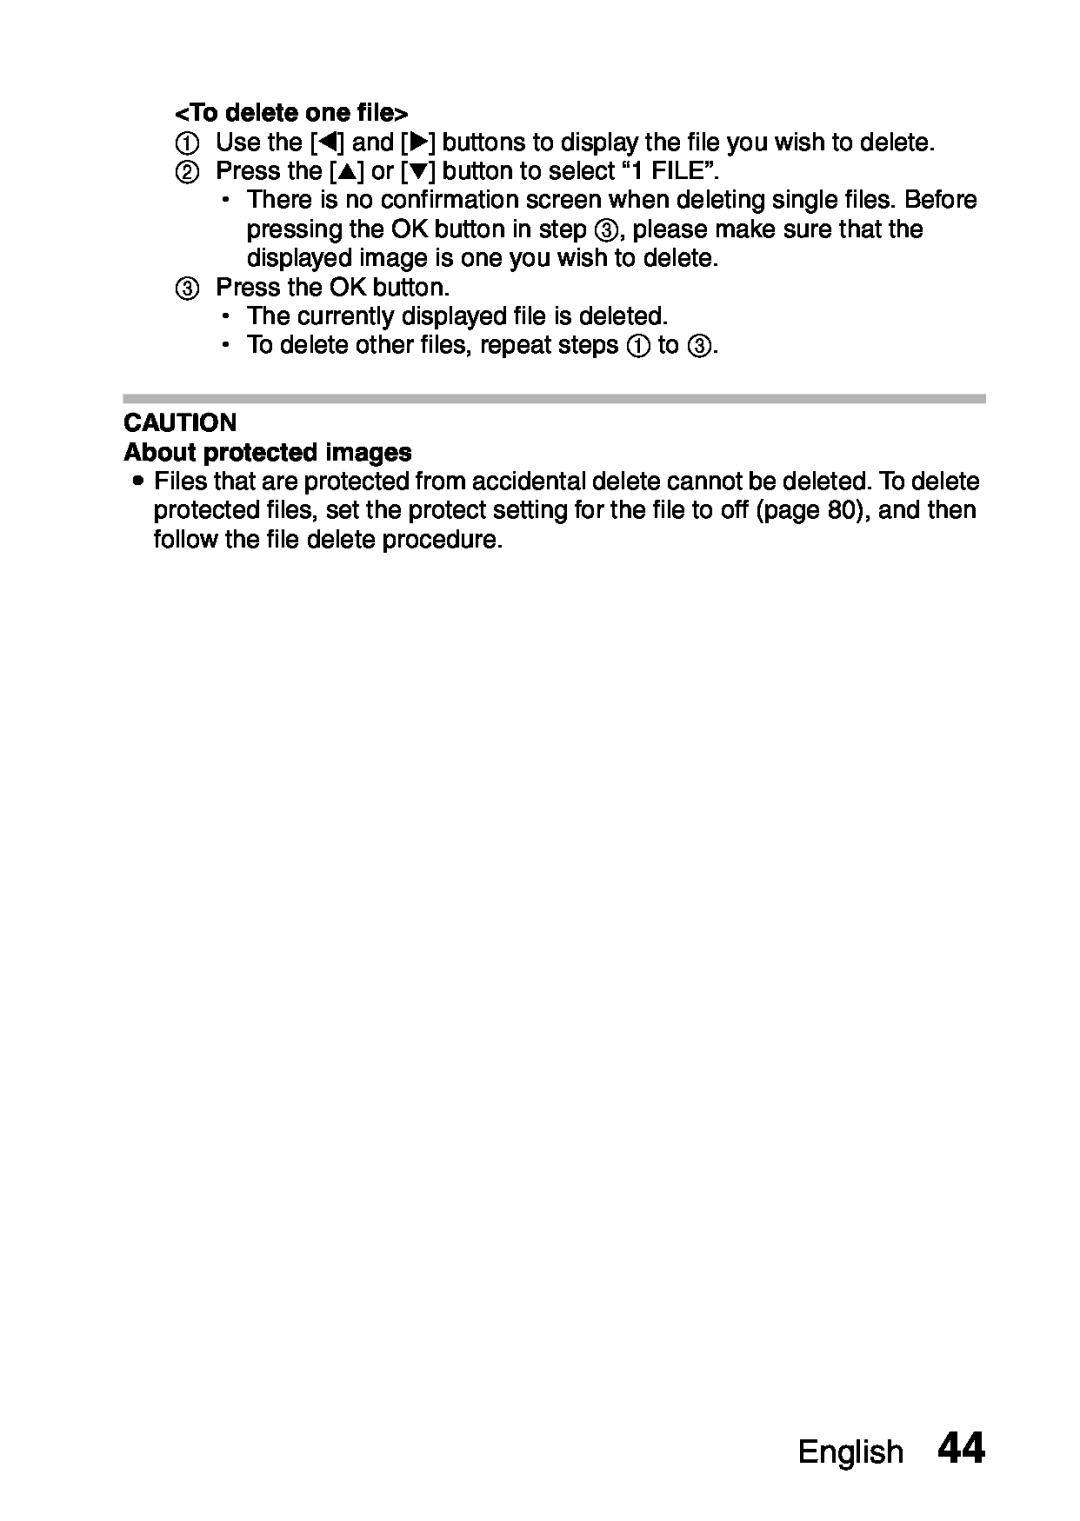 Samsung R50 instruction manual English, To delete one file, About protected images 